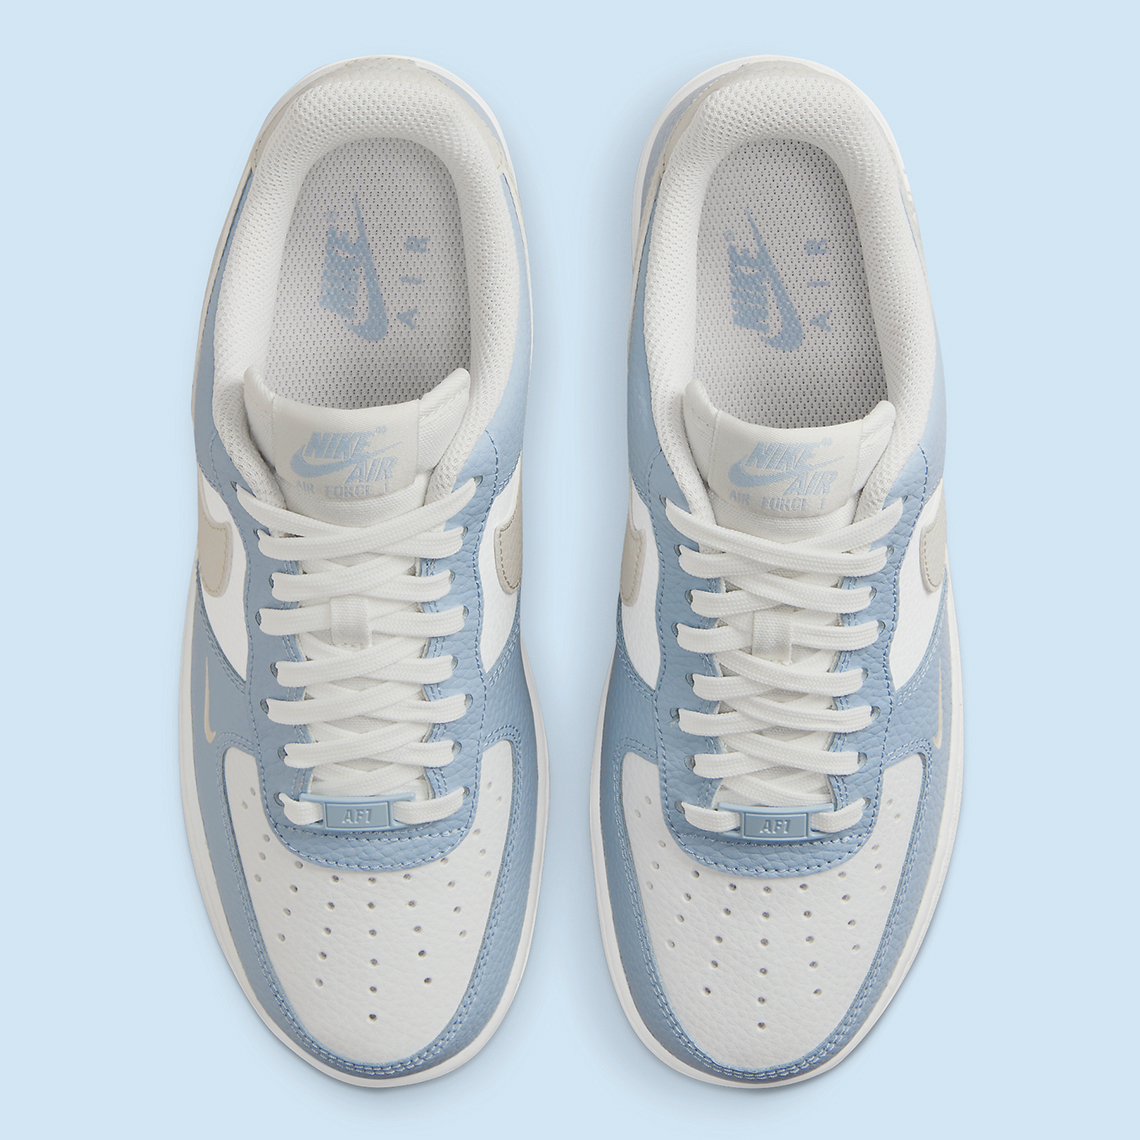 nike air force 1 low grey blue white hf0022 400 2